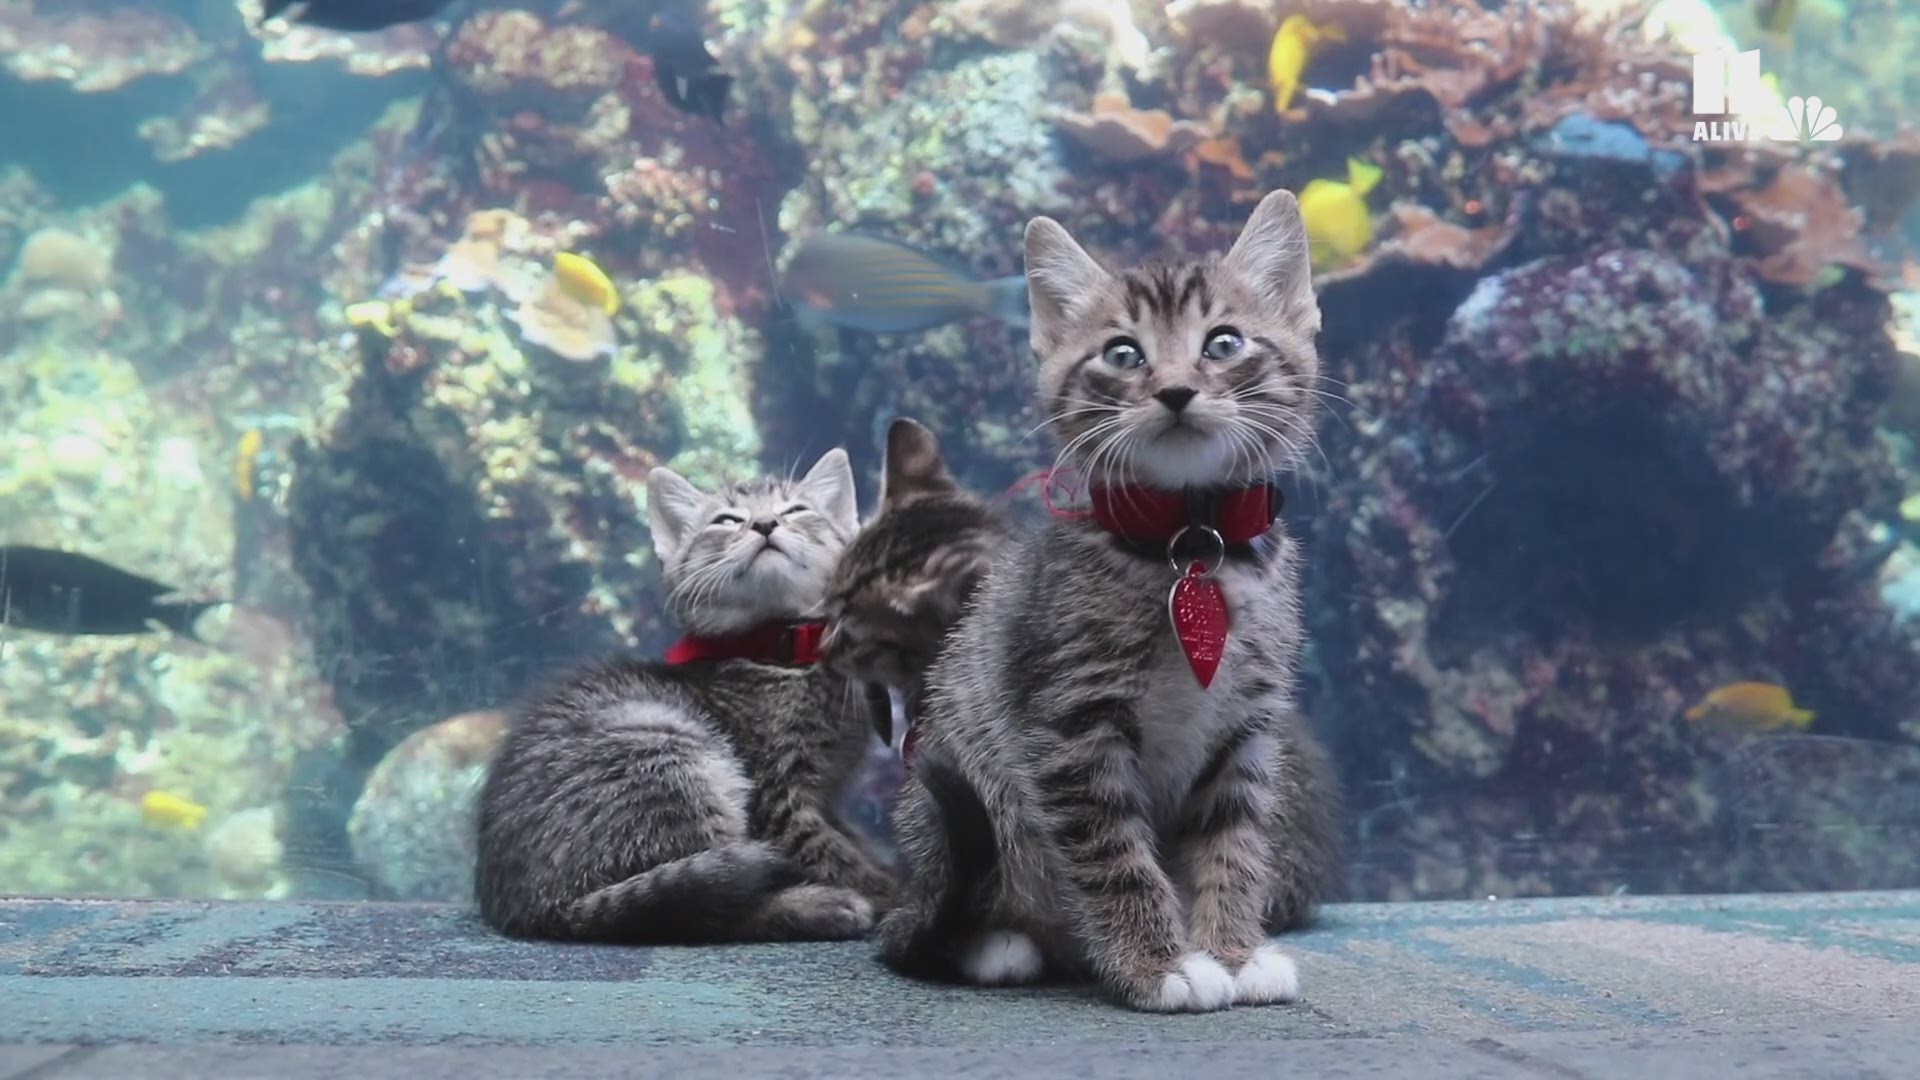 Atlanta Humane Society and Georgia Aquarium teamed up to give this group of kittens the tour of a lifetime.